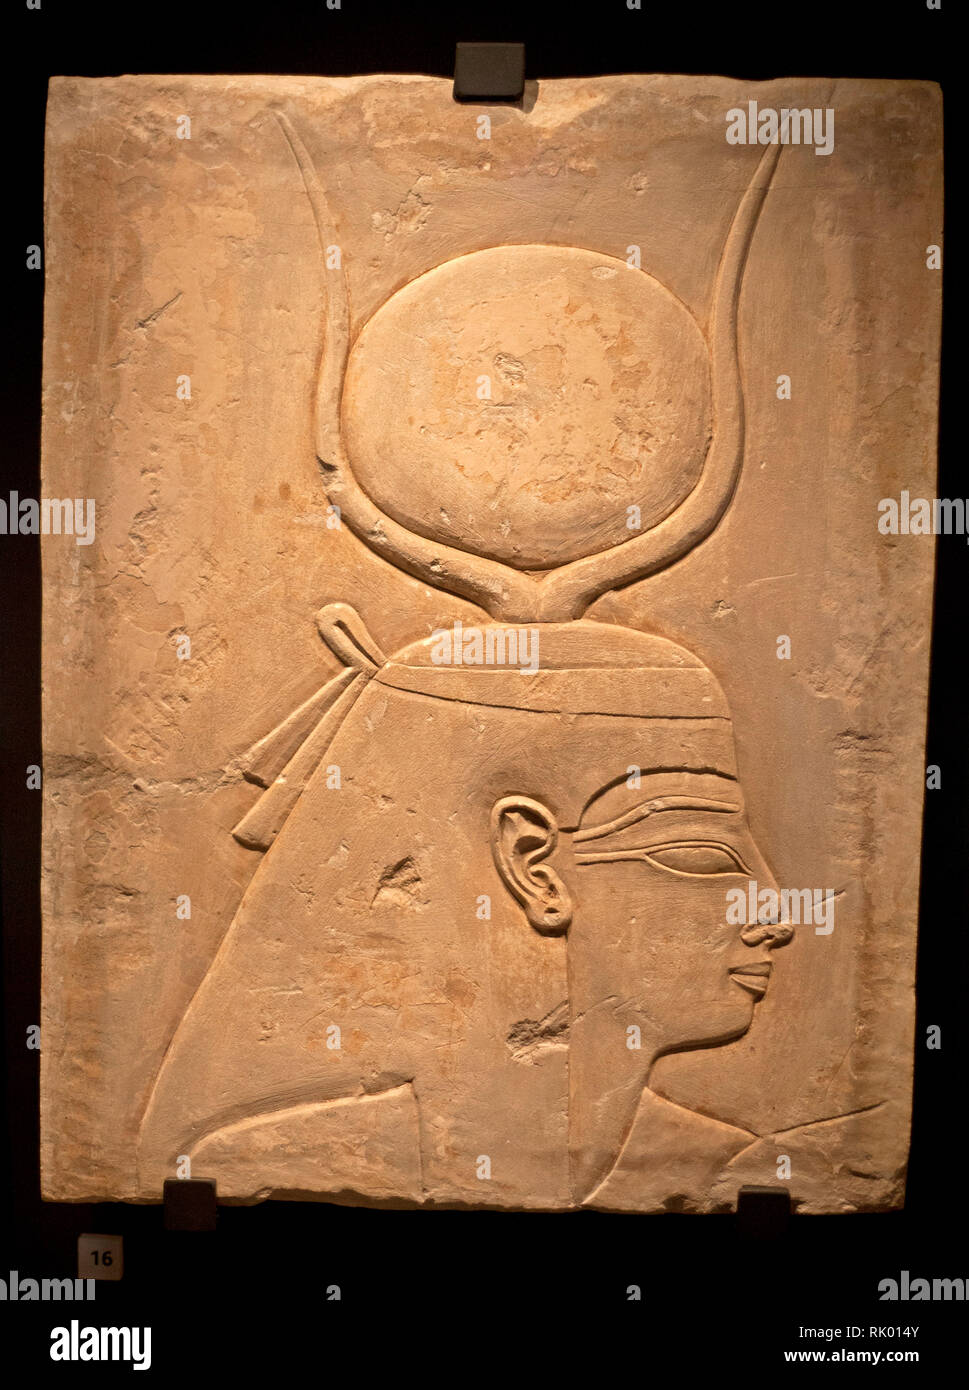 Edinburgh, Scotland, UK, 8th February 2019, after completion of a £3.6 million project backed by nearly 500 different donors National Museum of Scotland opens new Egyptian and east Asian treasures showcase as 1300 objects go on public display, 40 per cent will be displayed for the first time in a generation. Relief of the Goddess Hathor. Stock Photo